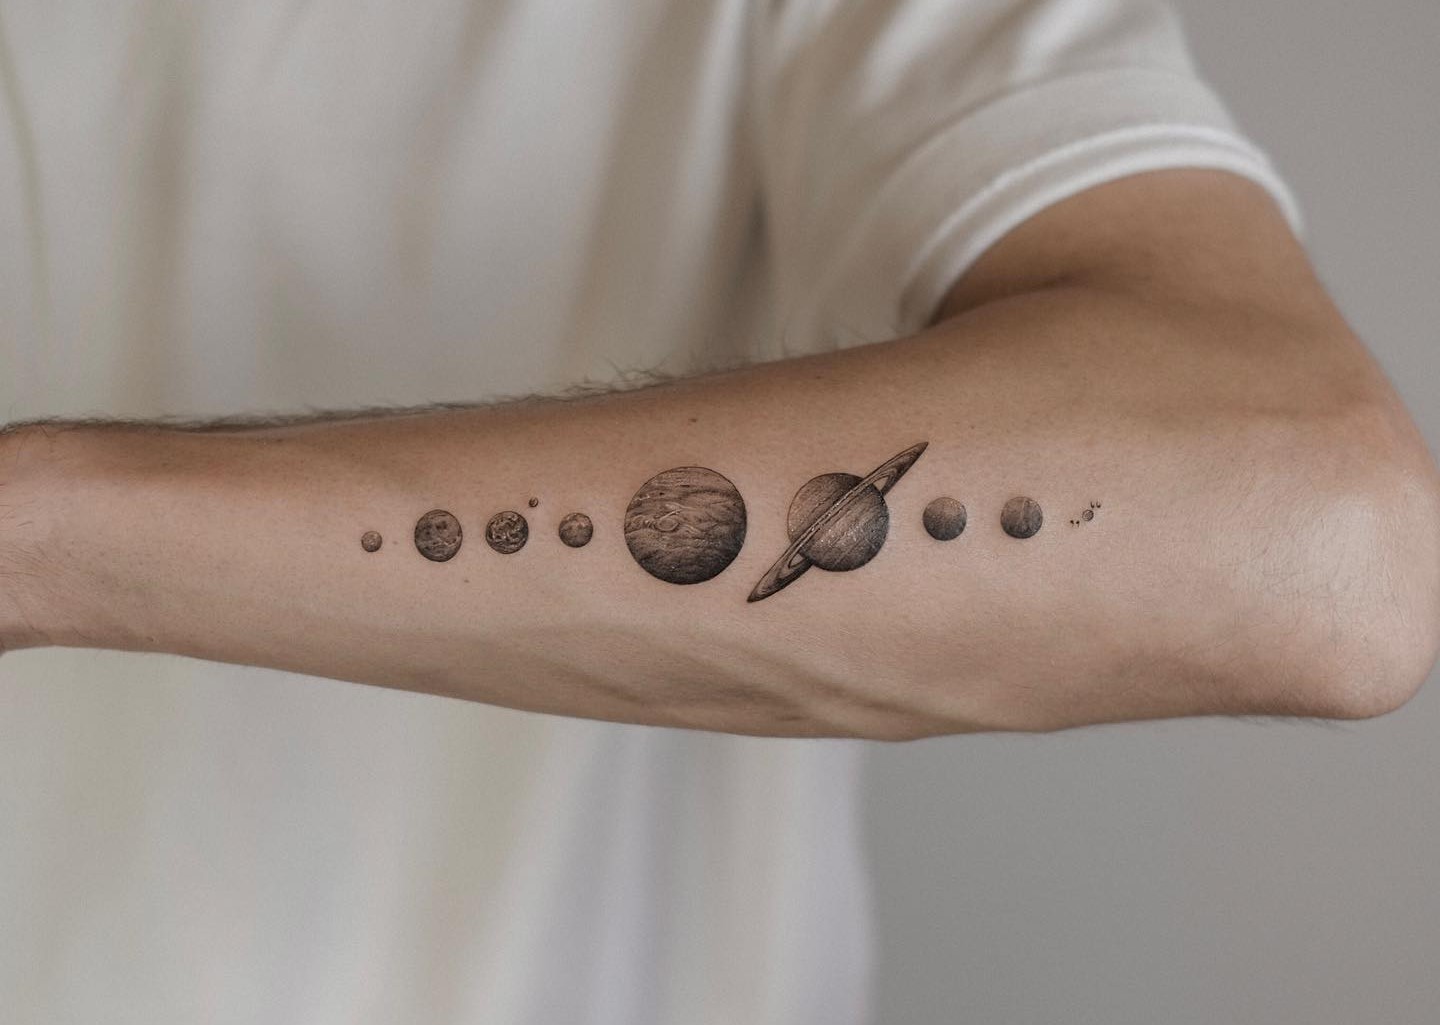 30 Amazing Science Tattoos To NerdOut On  TattooBlend